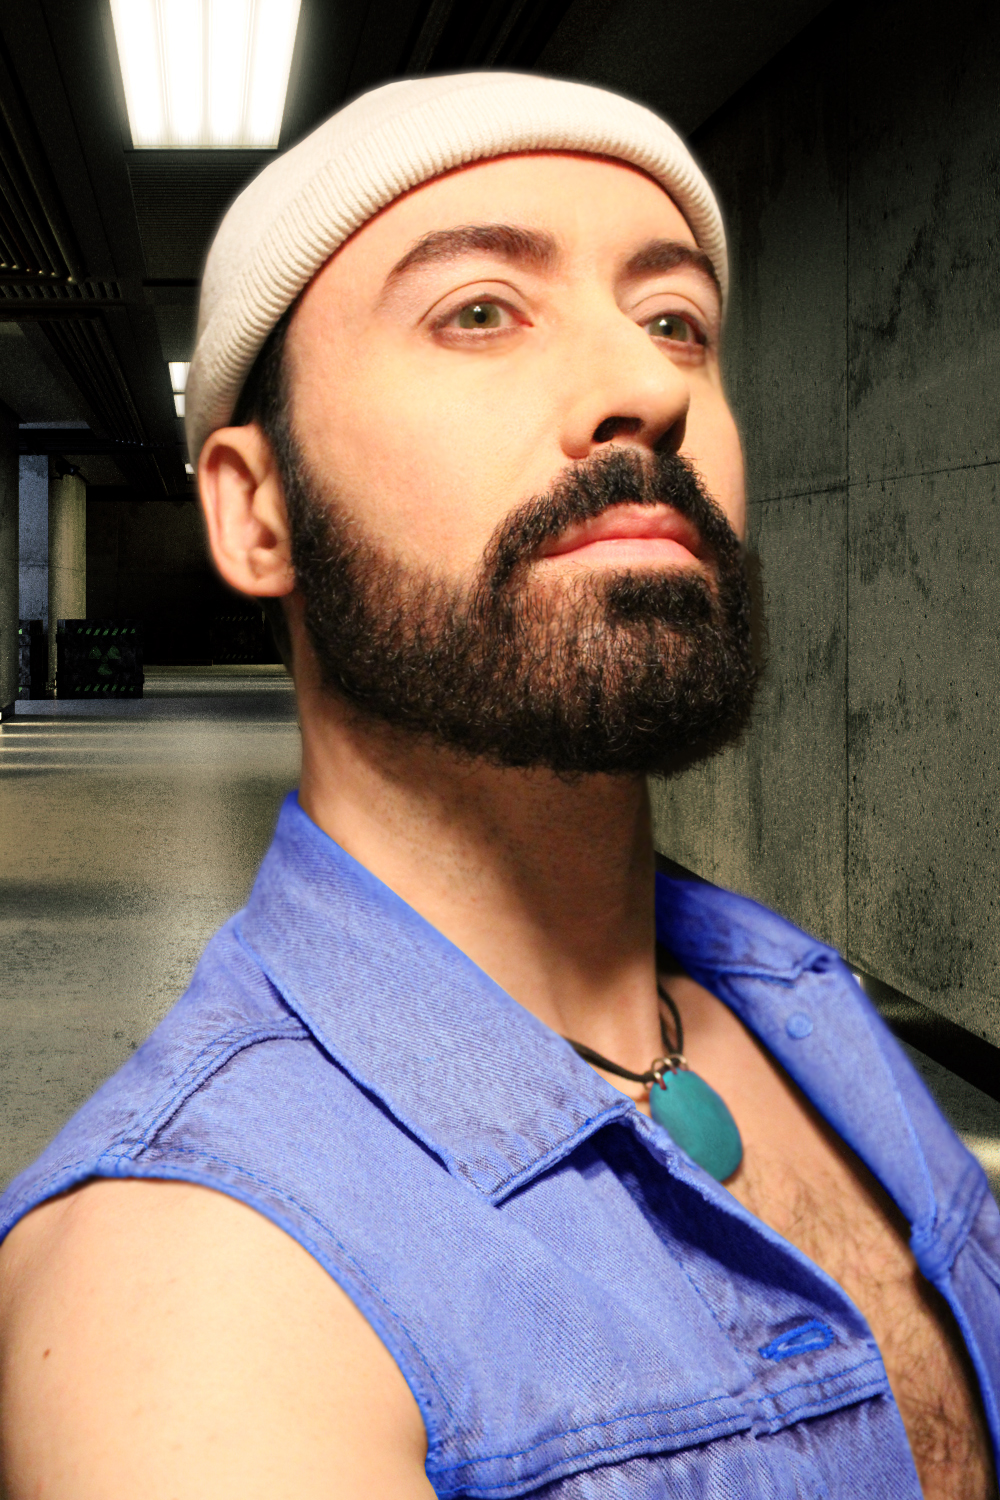 Where am I going exactly? You won't find out until 2015 but isn't 2014 almost over already? #TimeFlies #NewProject #NightLife #Beard #MoonDazeTV #LifeIsGood